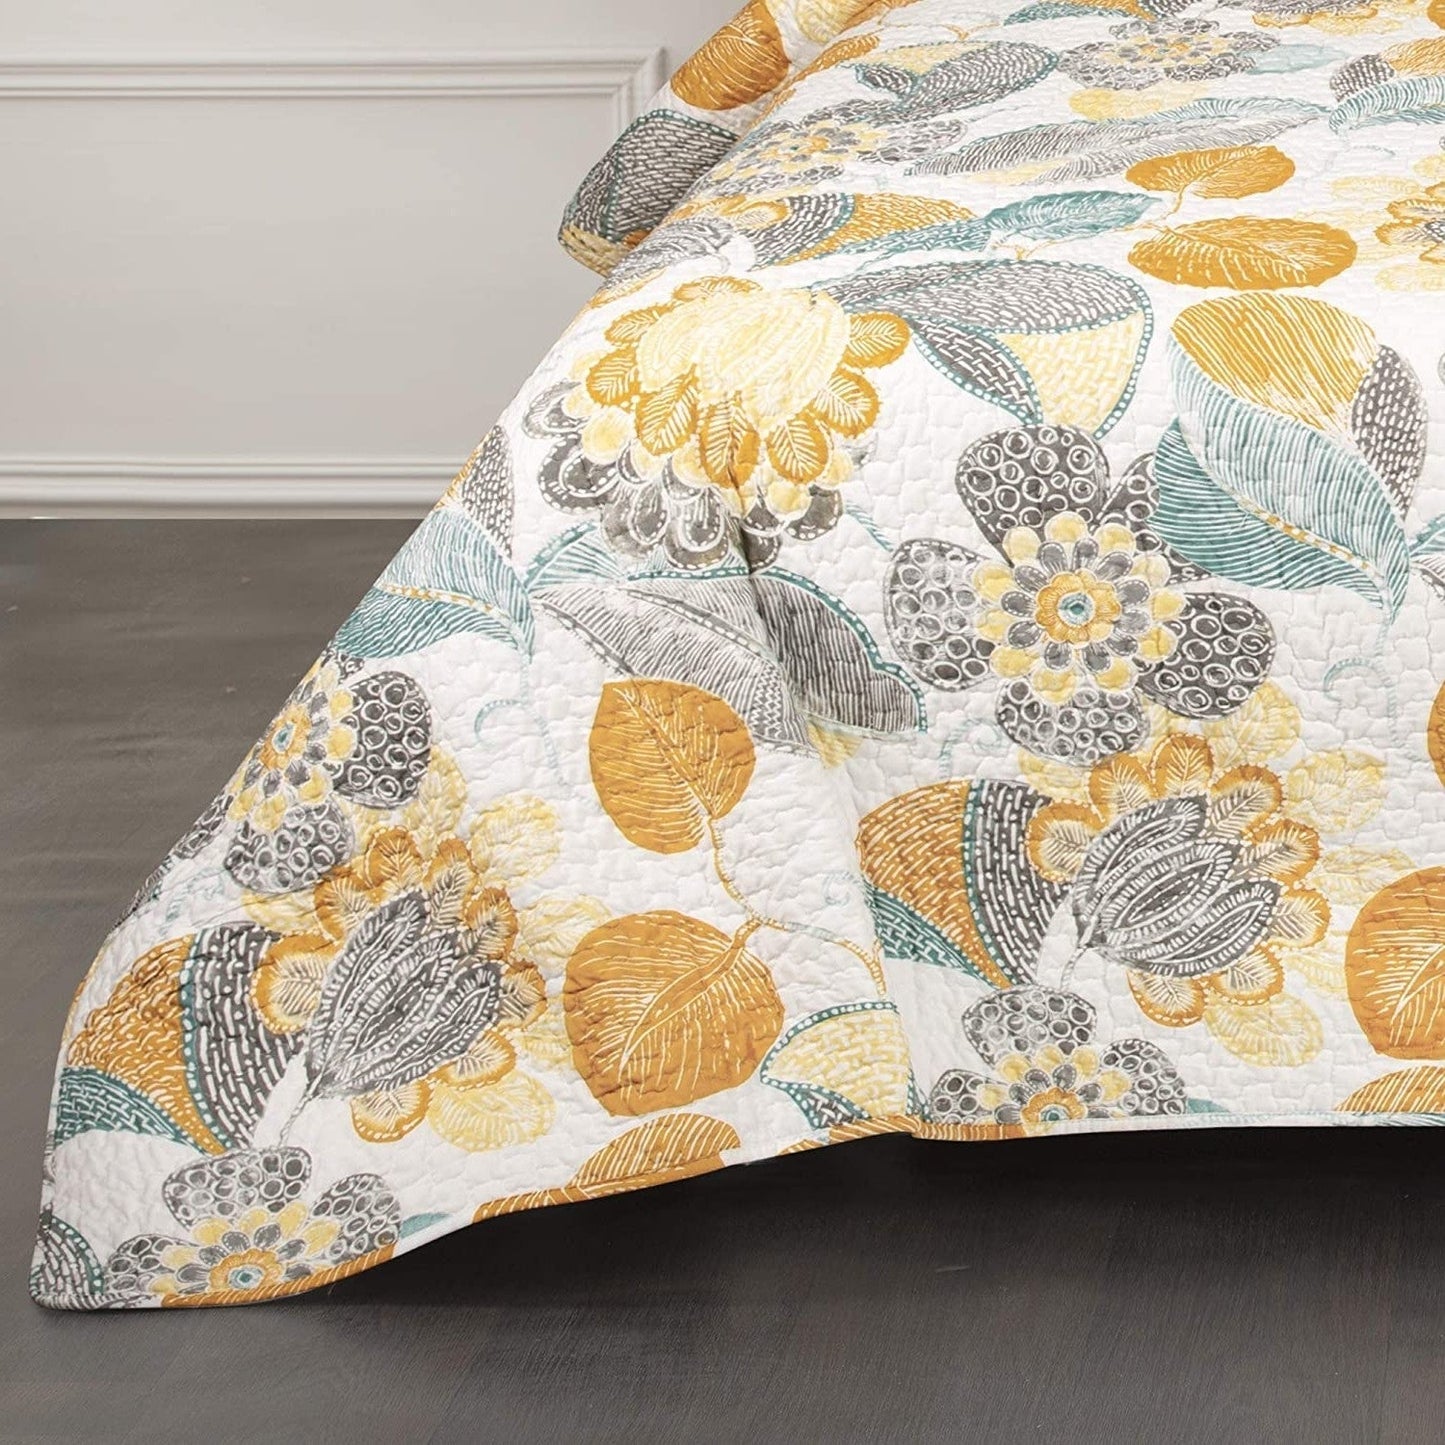 3 Piece Reversible Yellow Grey Floral Cotton Quilt Set in King Size-Novel Home